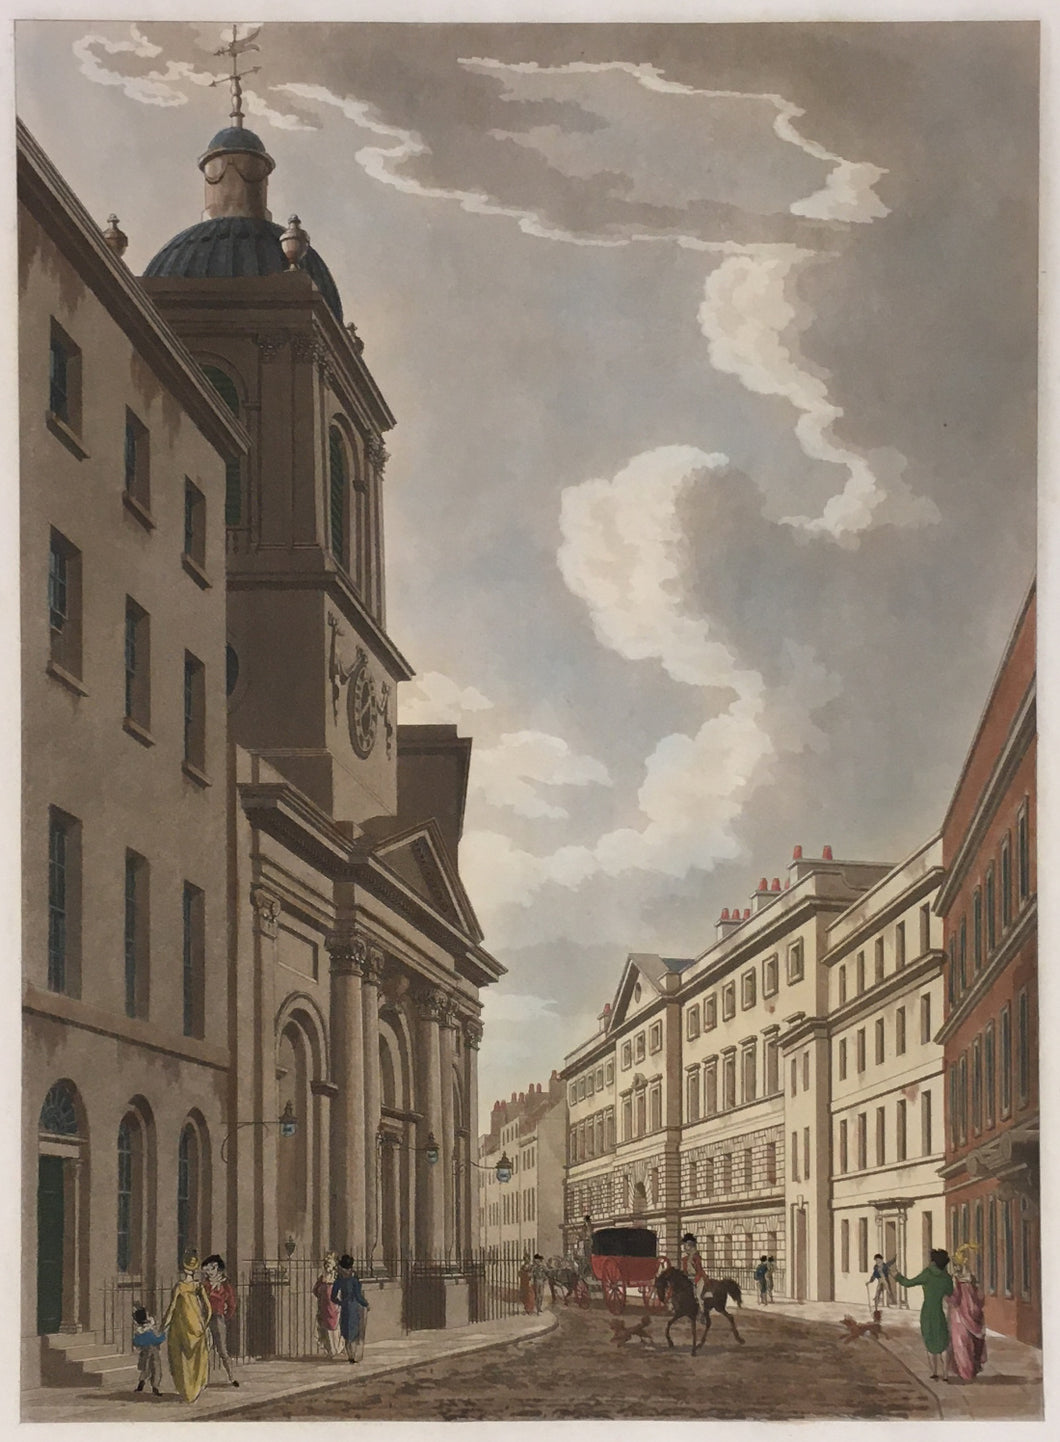 Malton, Thomas  “St. Peter Le Poor, Broad Street” Pl. 71. From 